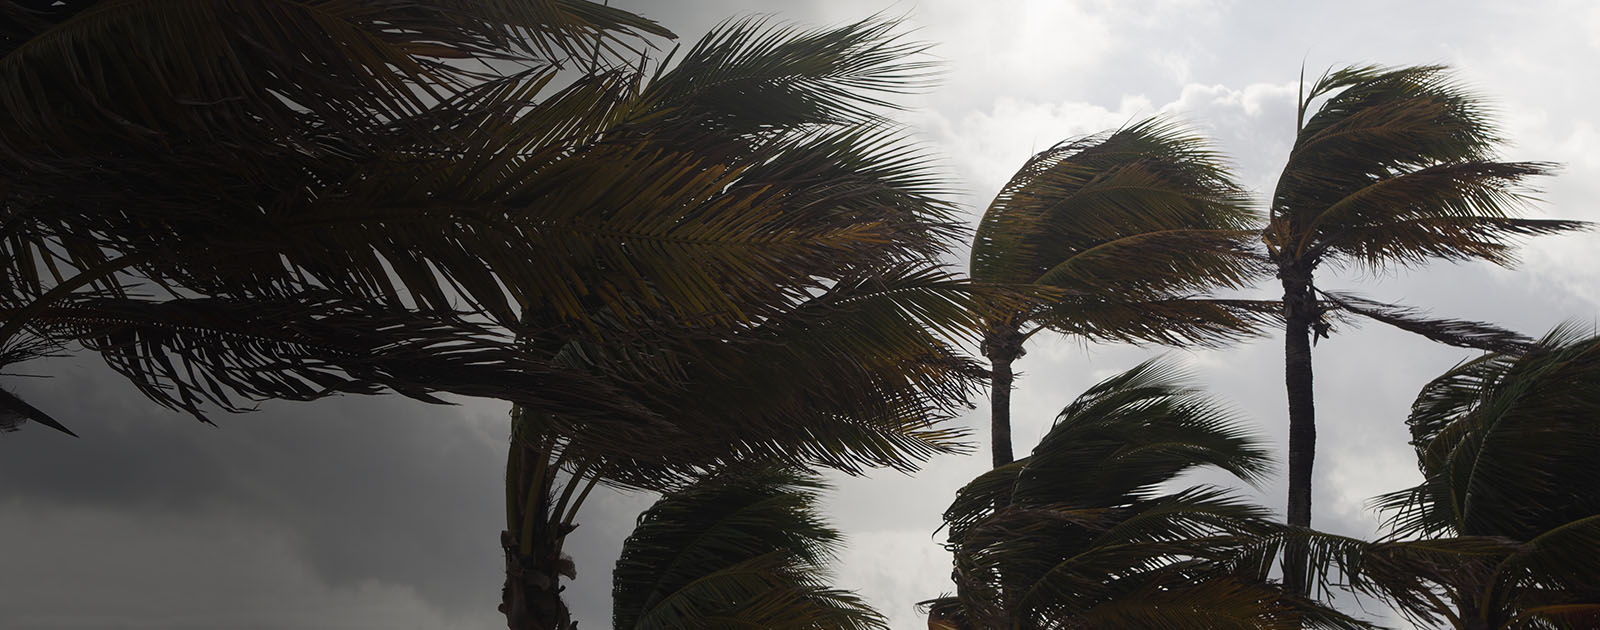 Palm tress in the wind.